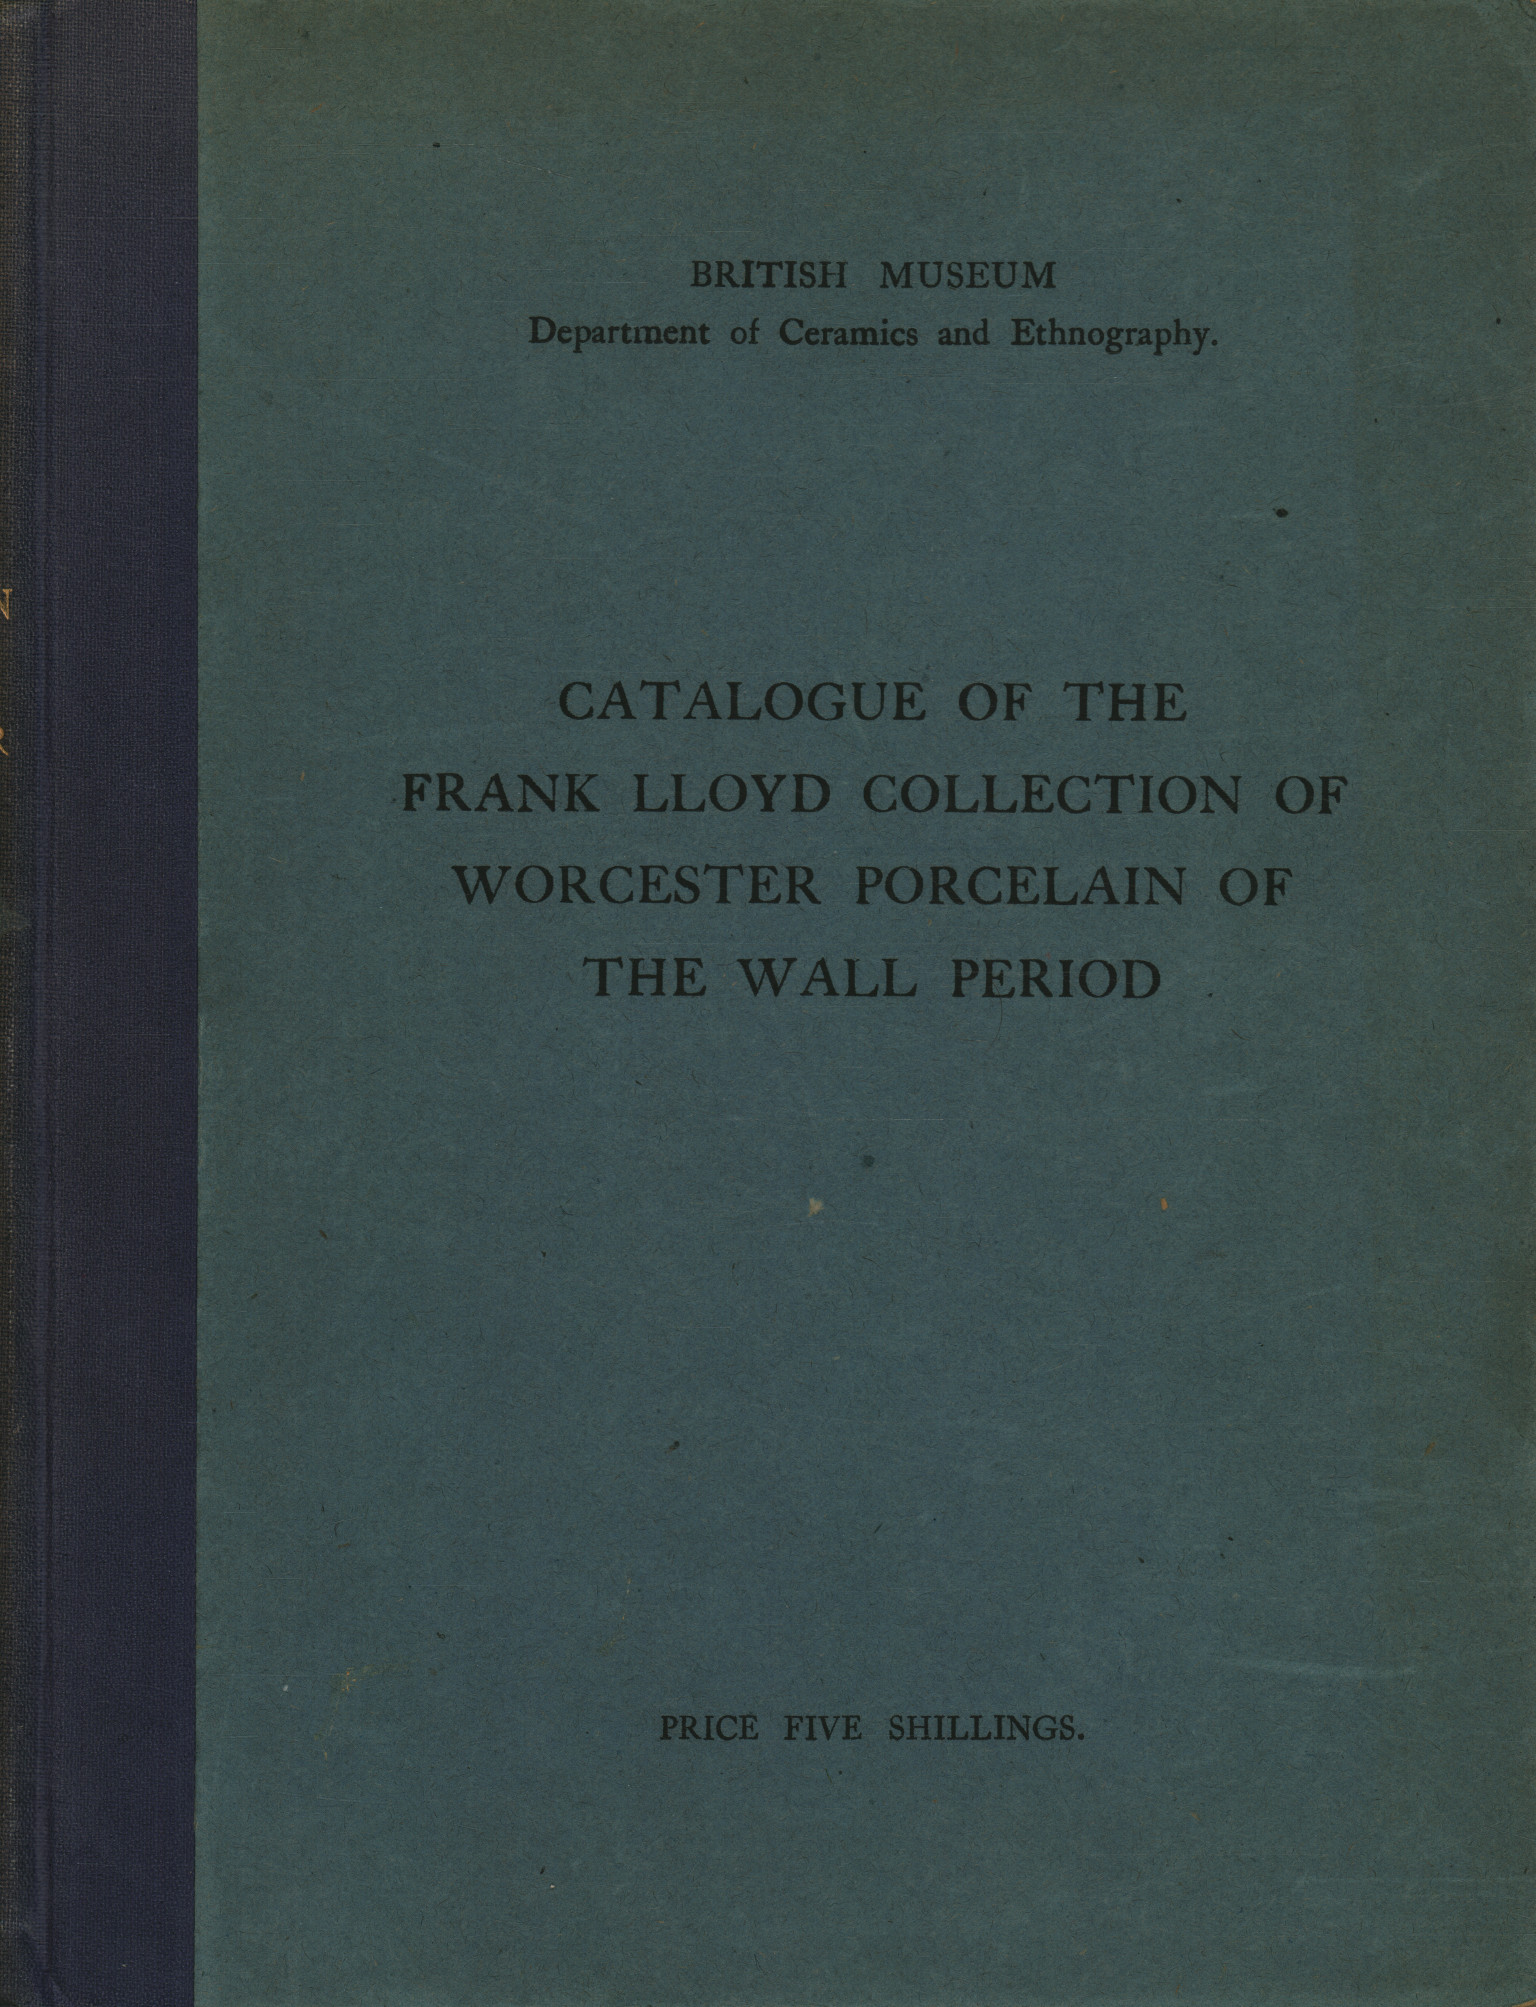 Catalogue of the Frank Lloyd Collection%